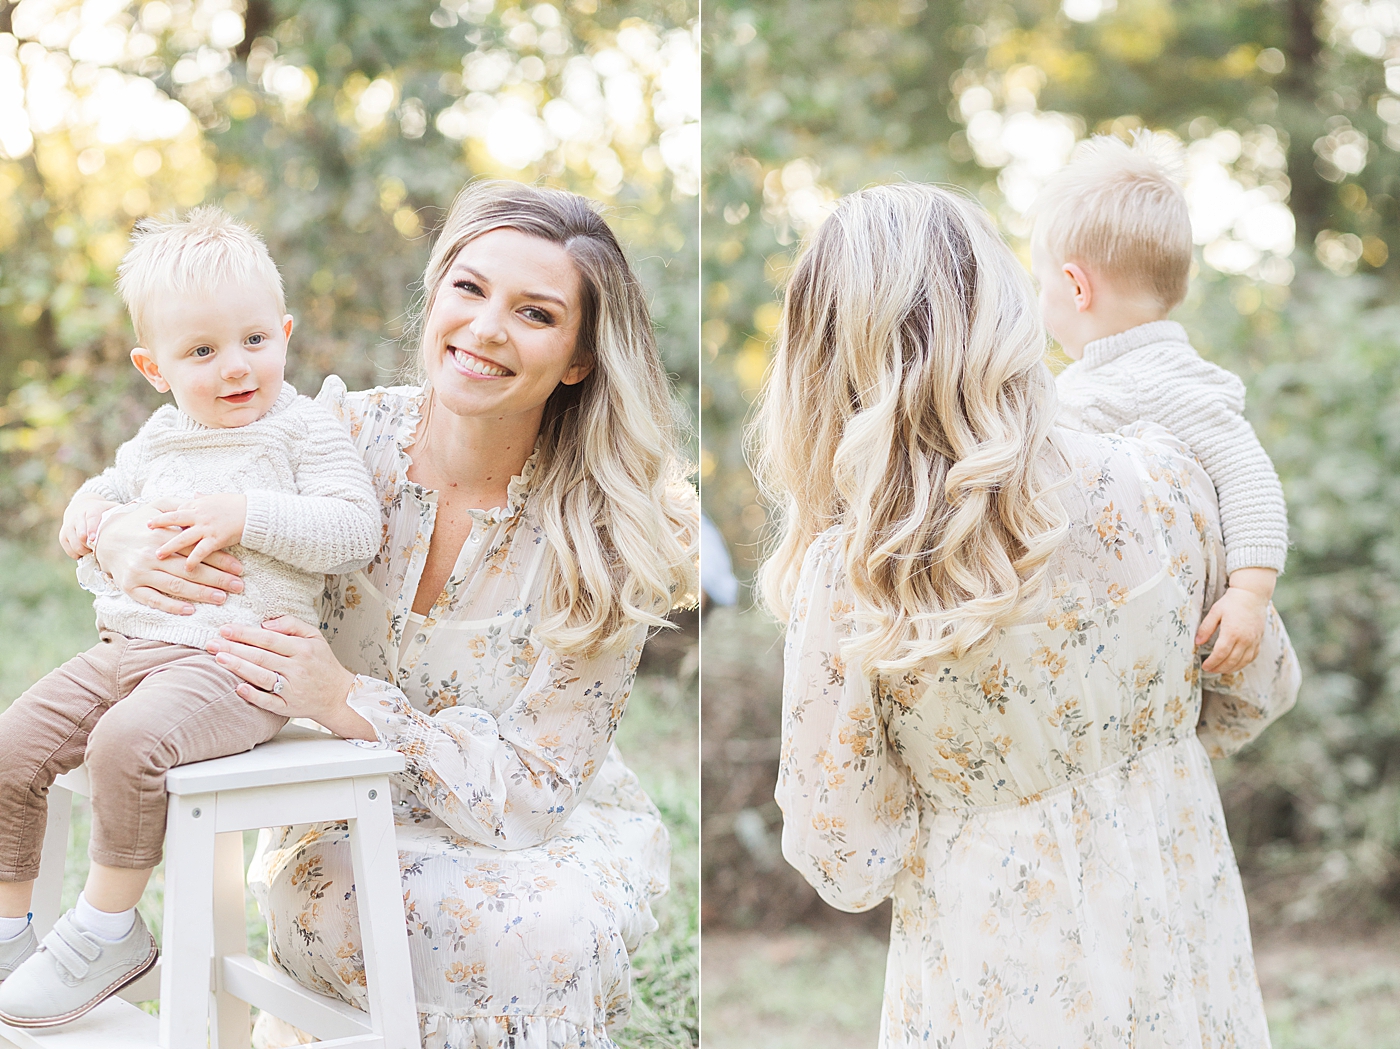 Mom with her youngest son. She's wearing a floral dress. Photos by Fresh Light Photography.